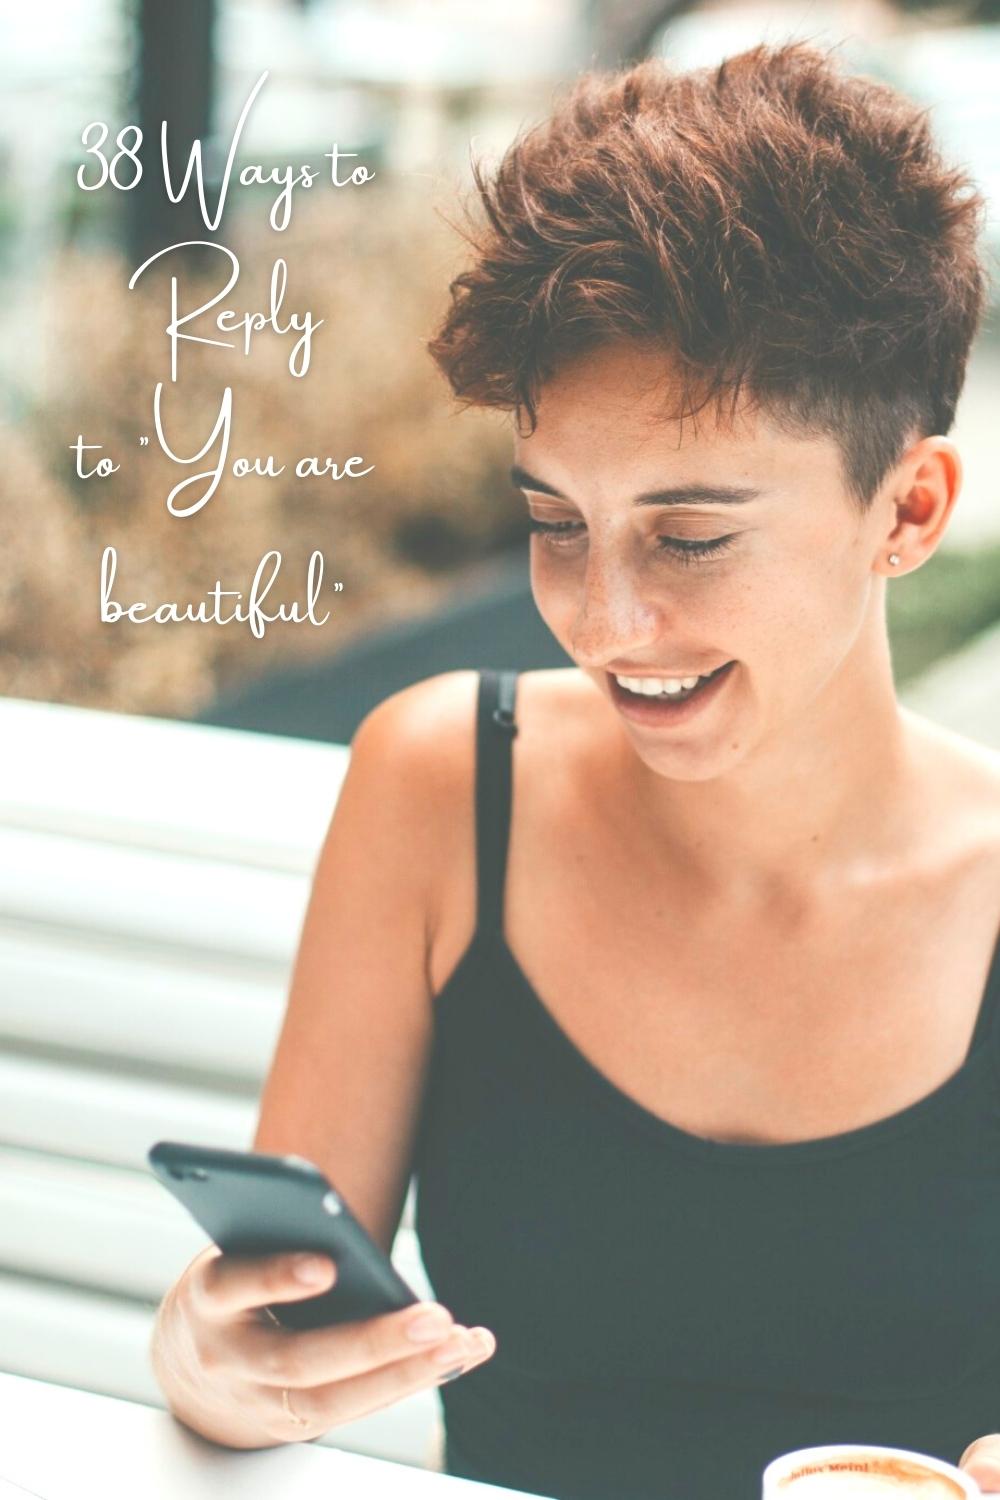 38 Ways to Reply to You are beautiful